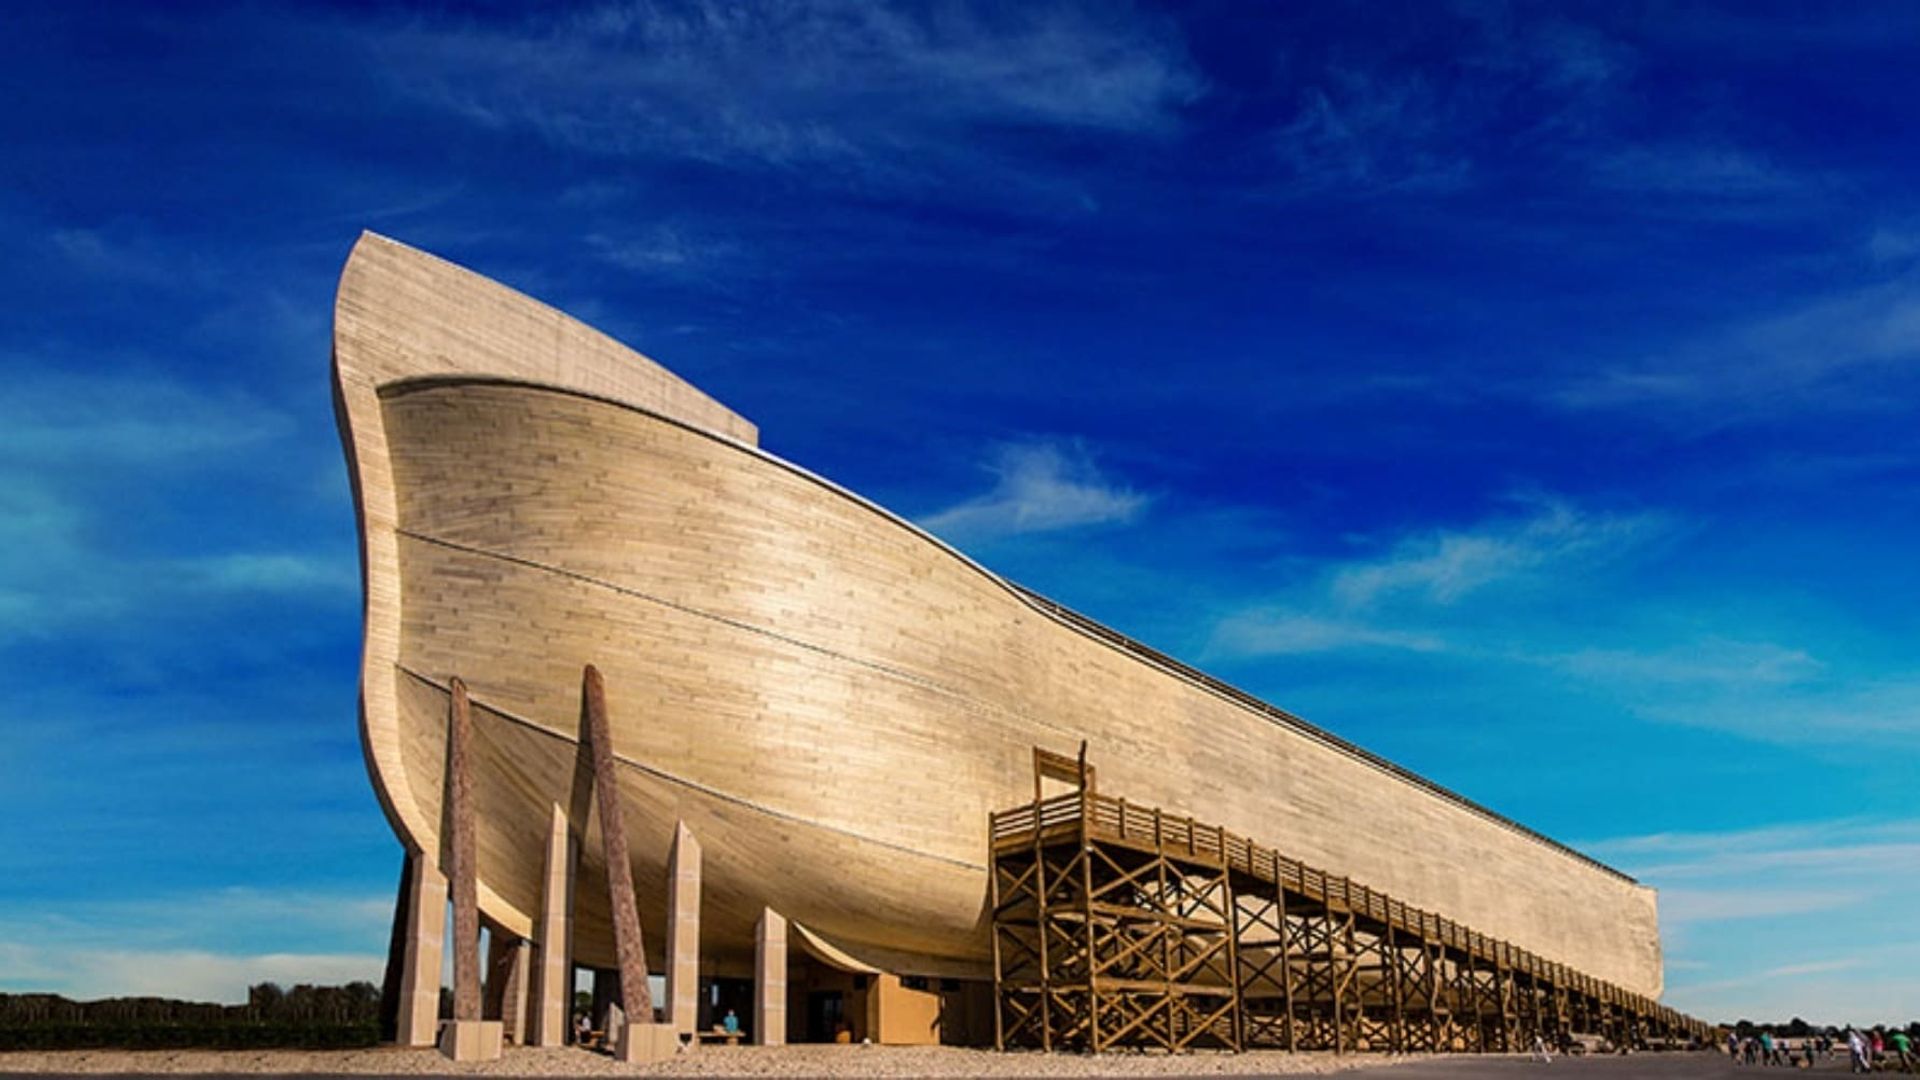 The Building of the Ark Encounter background